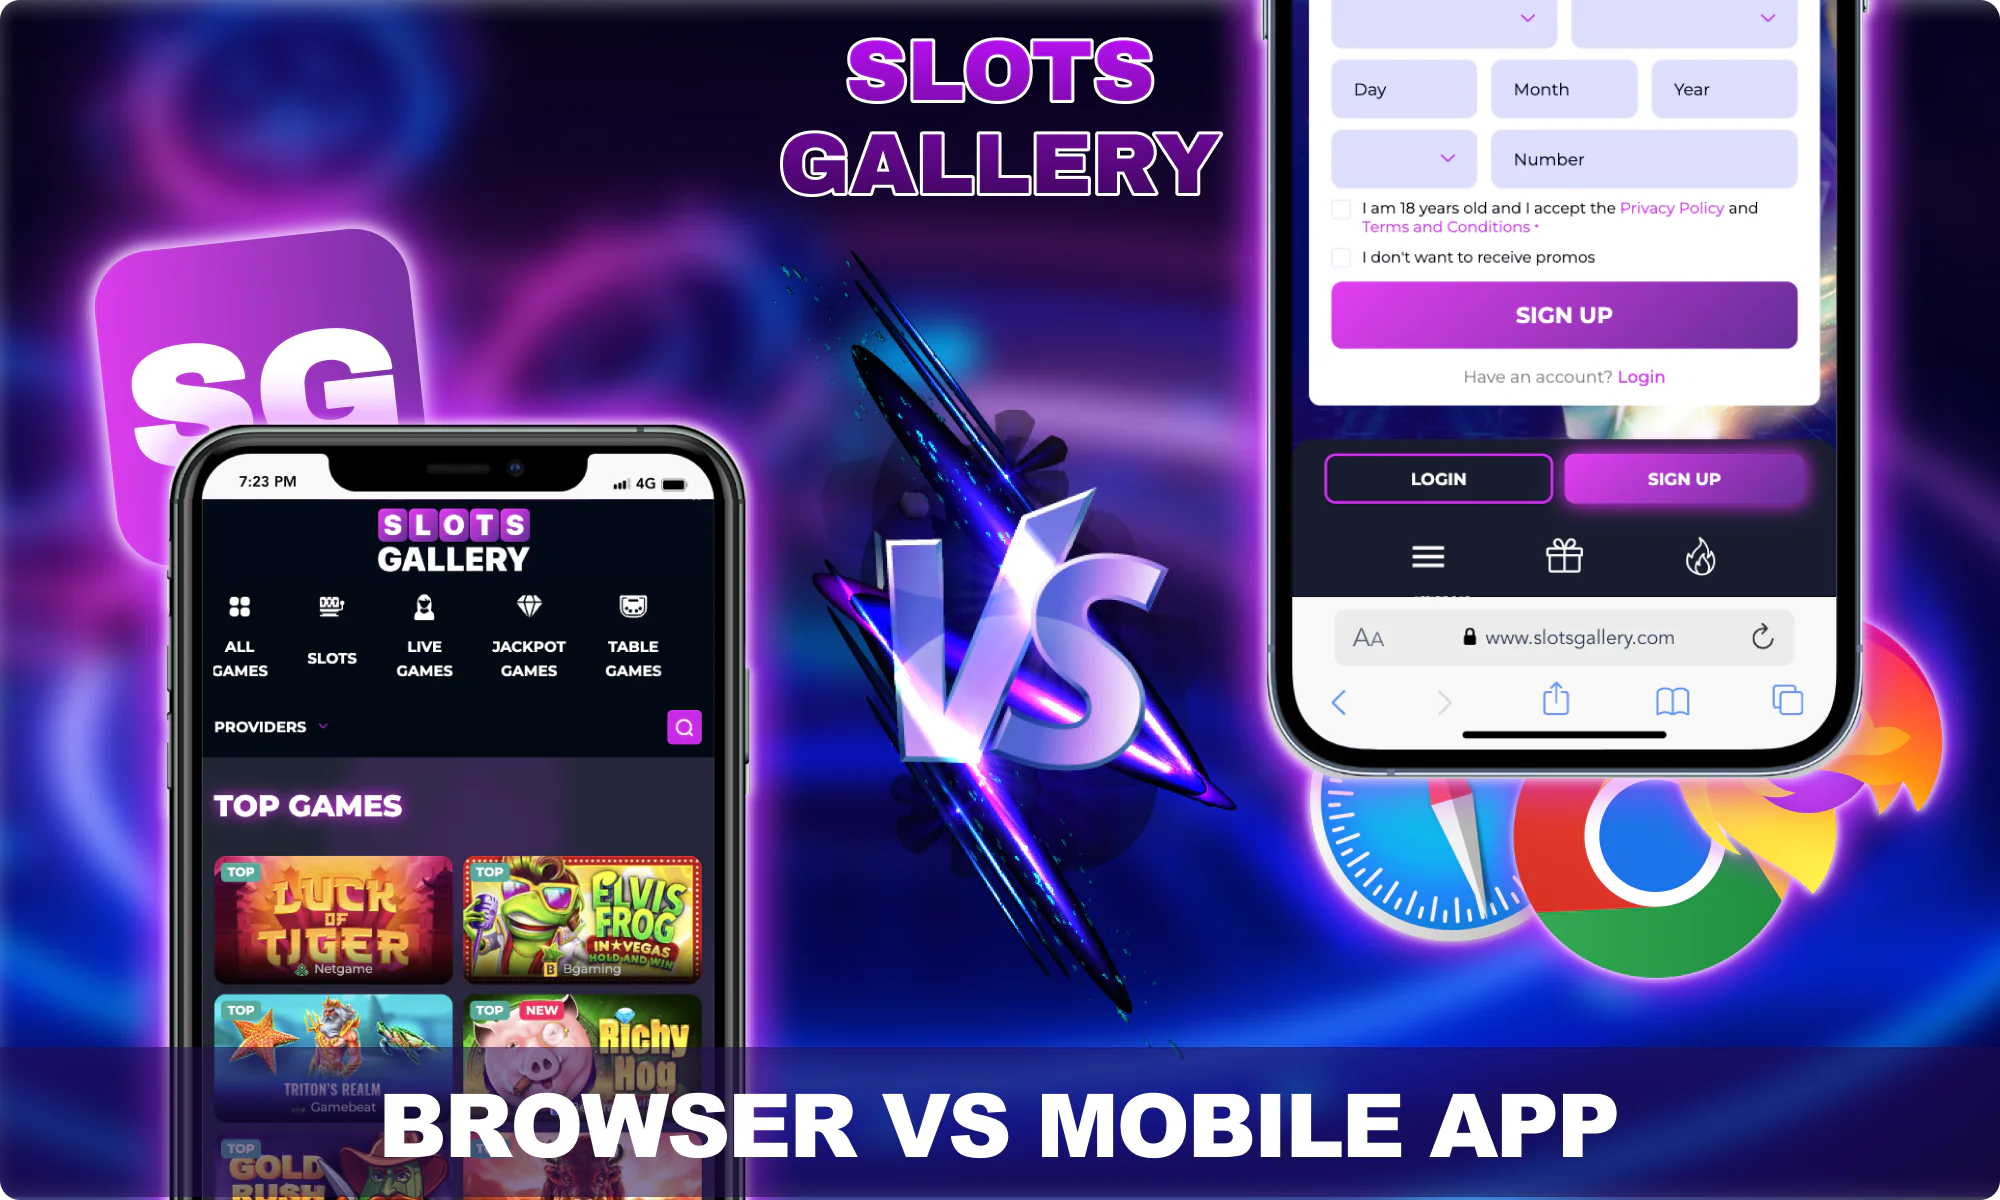 Slots Gallery Mobile App or Browser - which option is better for Australian players